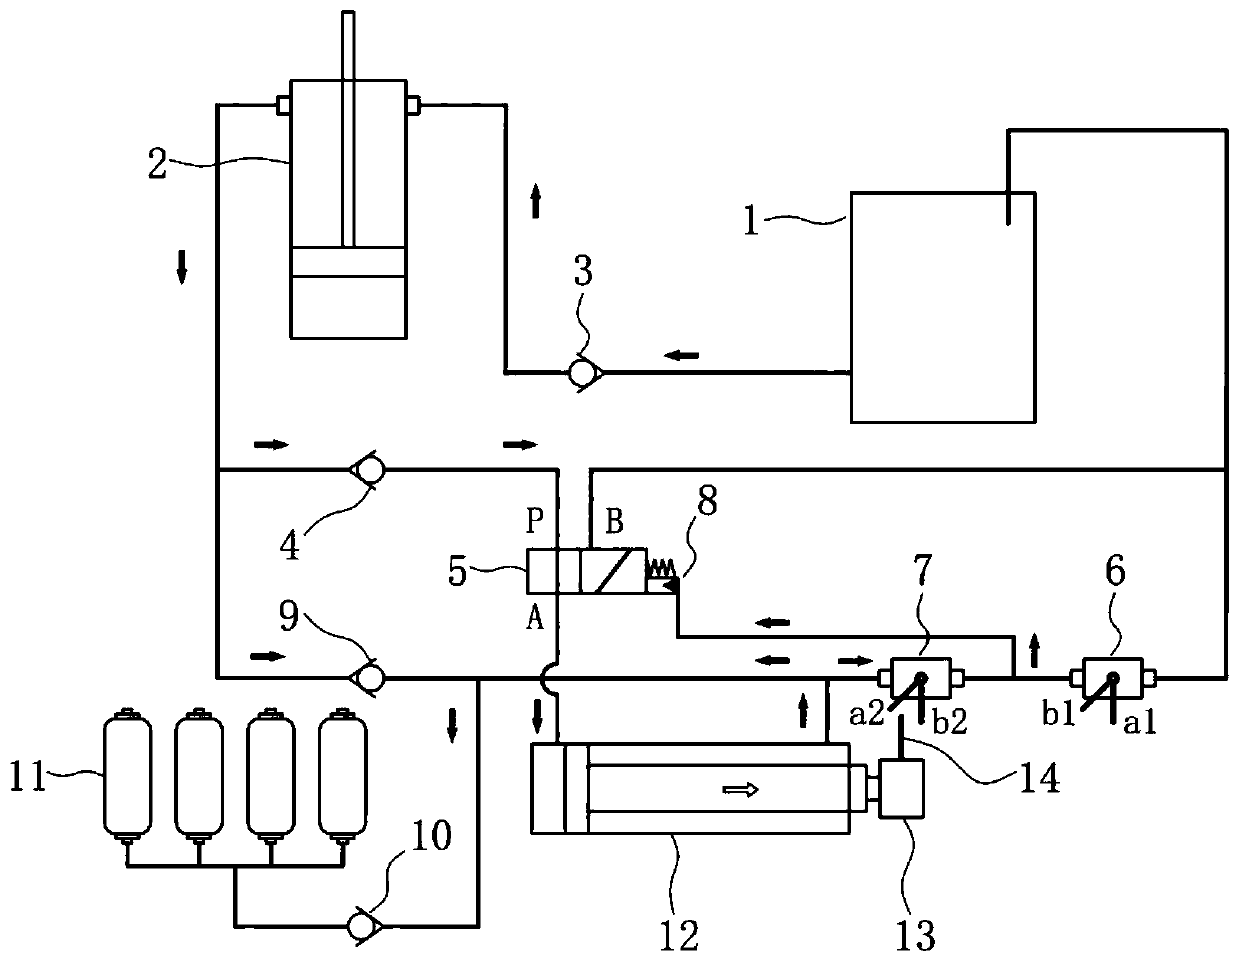 A self-pressurizing wave energy device energy extraction system